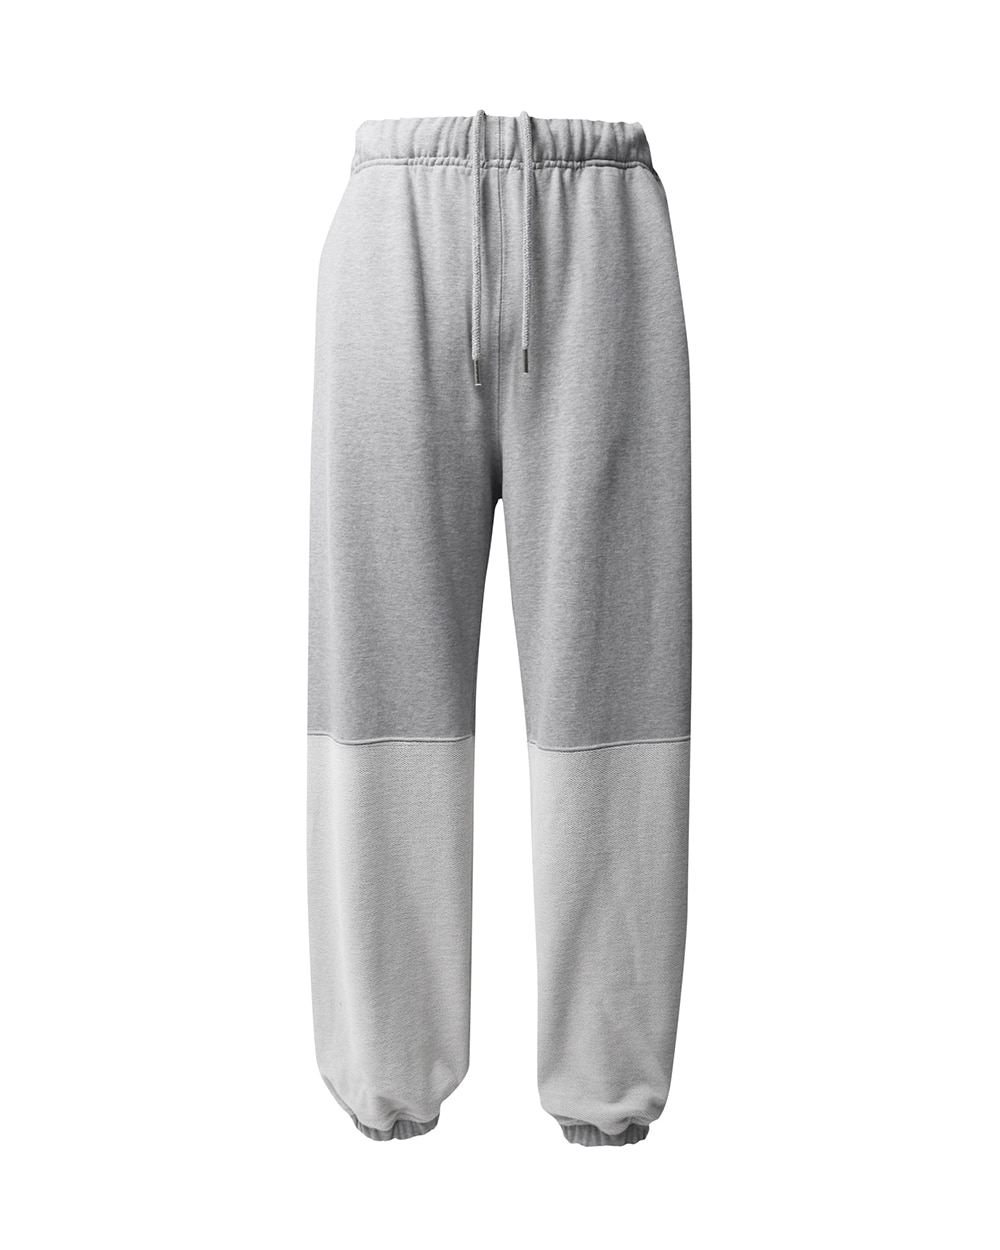 ATE STUDIOS INSIDE-OUT SWEAT PANTS (Gray)